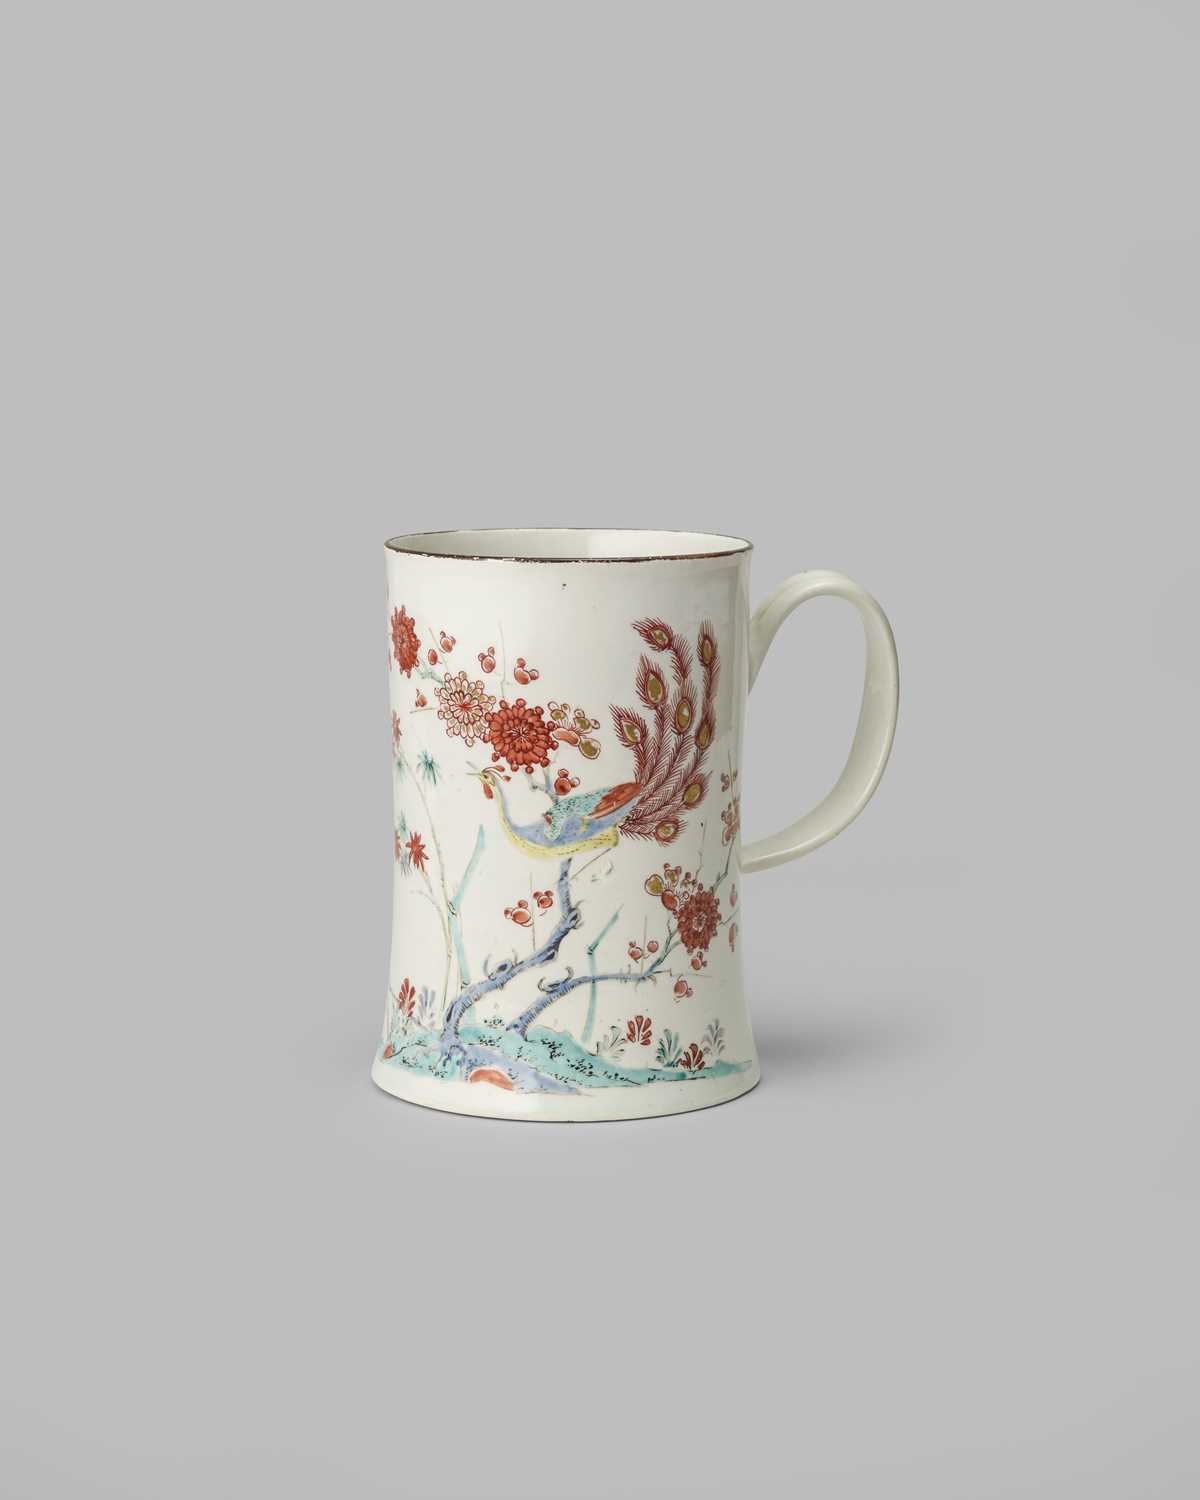 A good and rare Vauxhall mug, c.1755, the cylindrical form rising from a flared foot, well painted